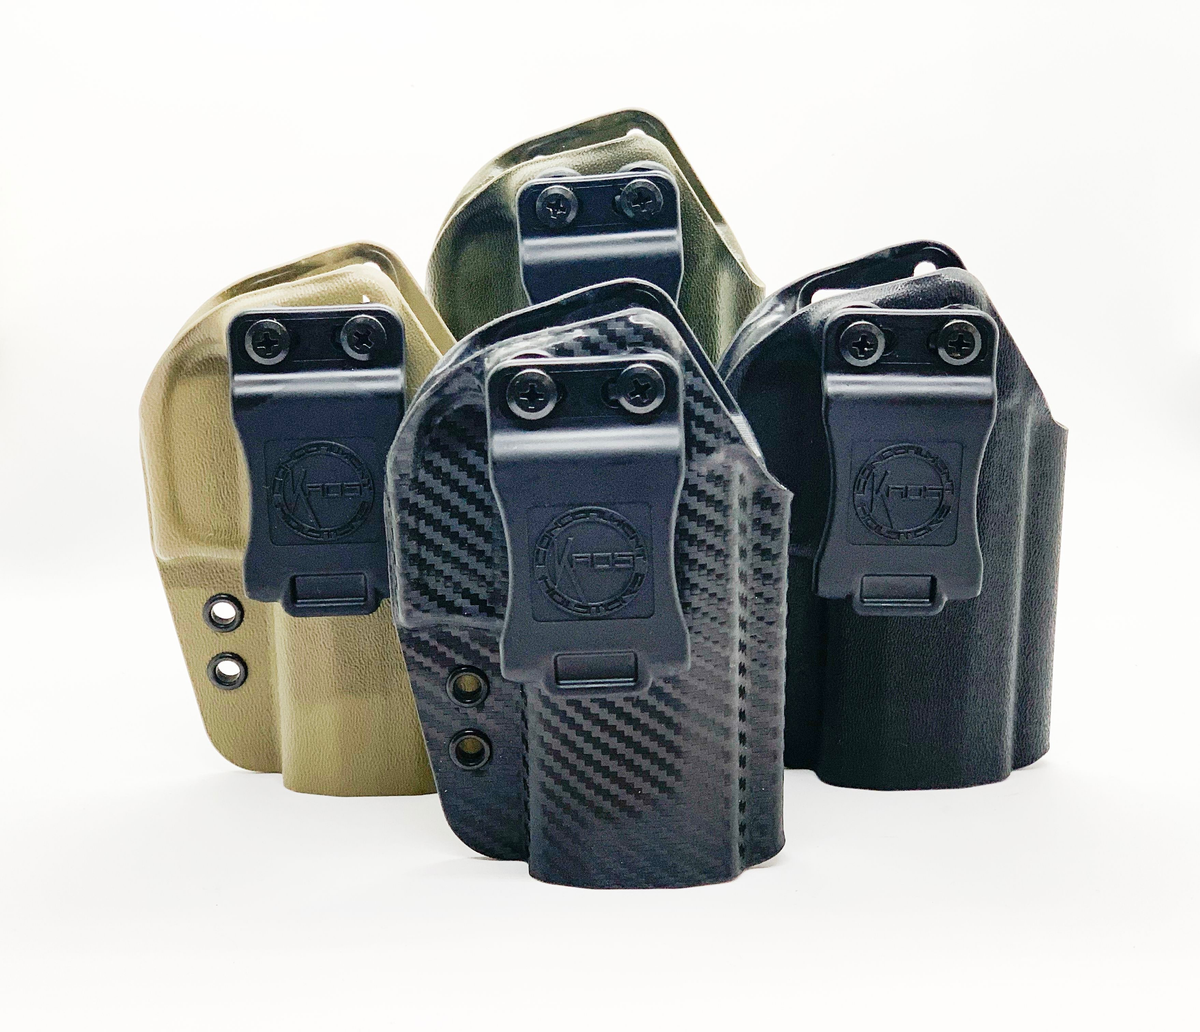  Concealment Express Holster Claw Kit - Made in The USA, for  IWB & Tuckable Gun Holsters (Holster Not Included) - Fits Left & Right Hand  - Holster Wing , Modwing : Sports & Outdoors